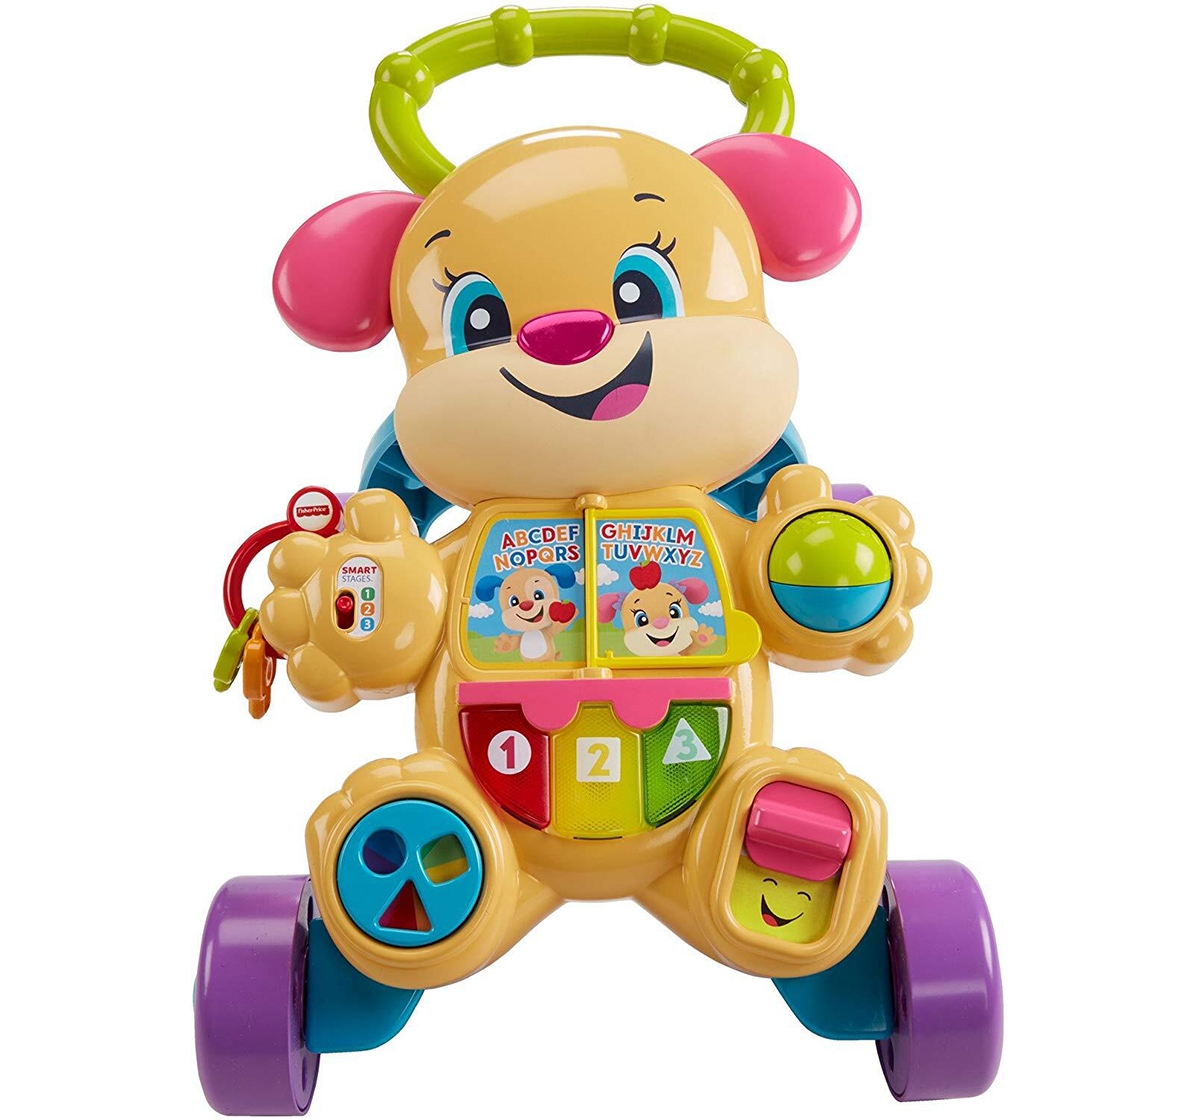 Fisher-Price | Fisher Price Laugh And Learn Smart Stages Learn With Sis Walker, Multi Color Baby Gear for Kids age 6M+ 2